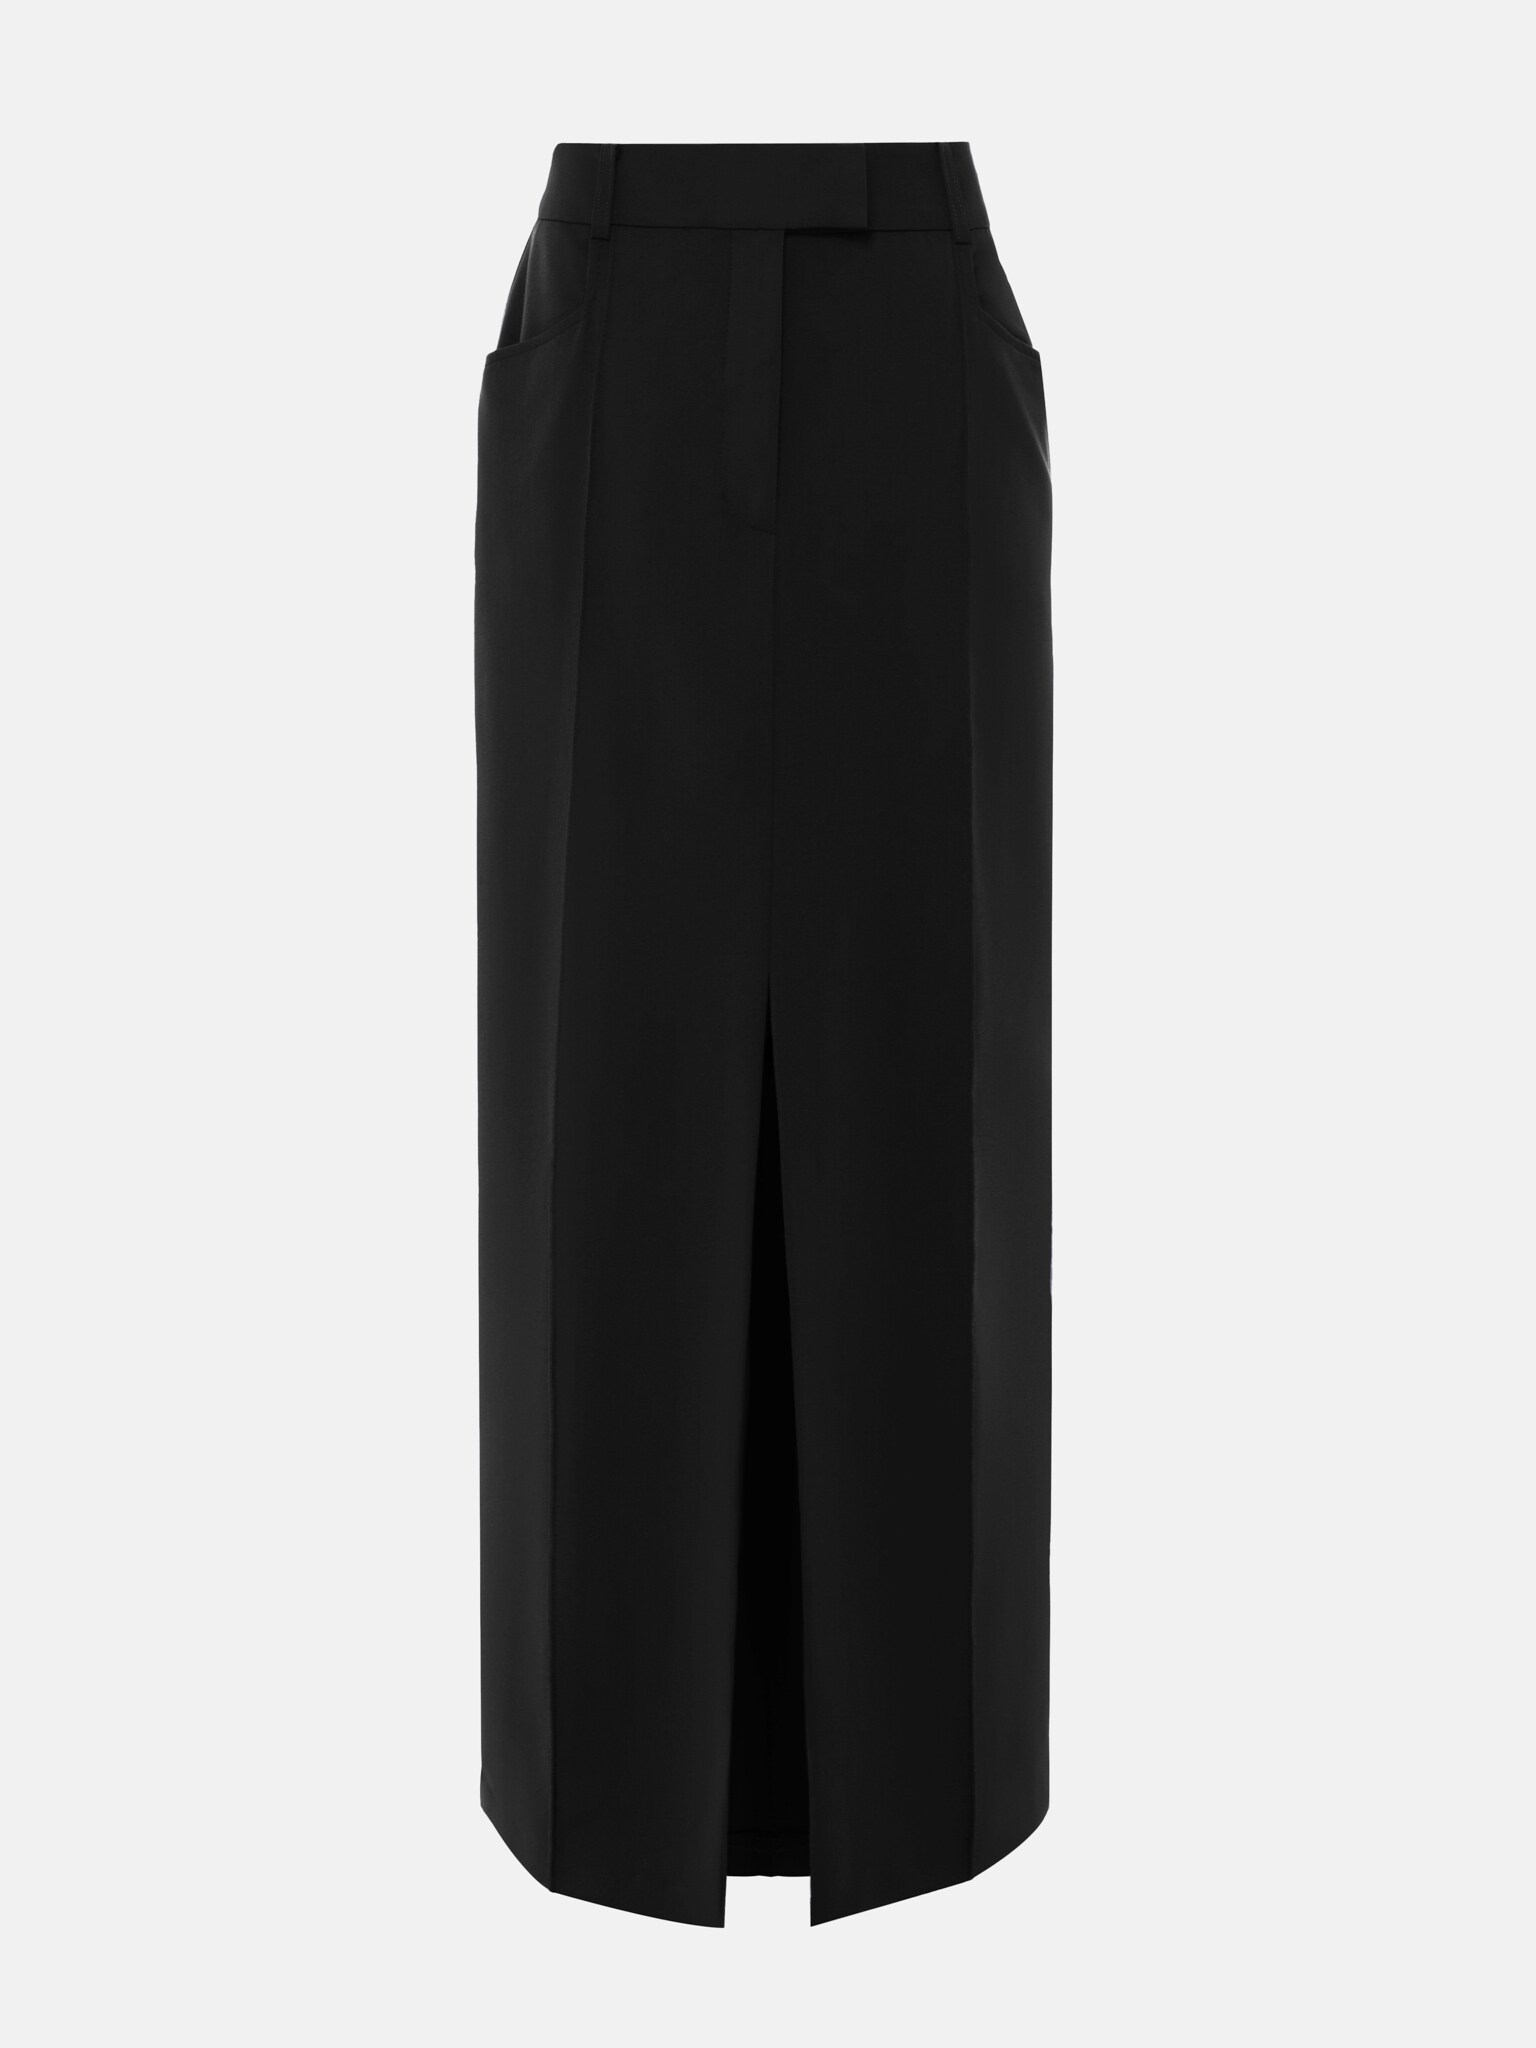 Maxi skirt with a front slit from suiting fabric